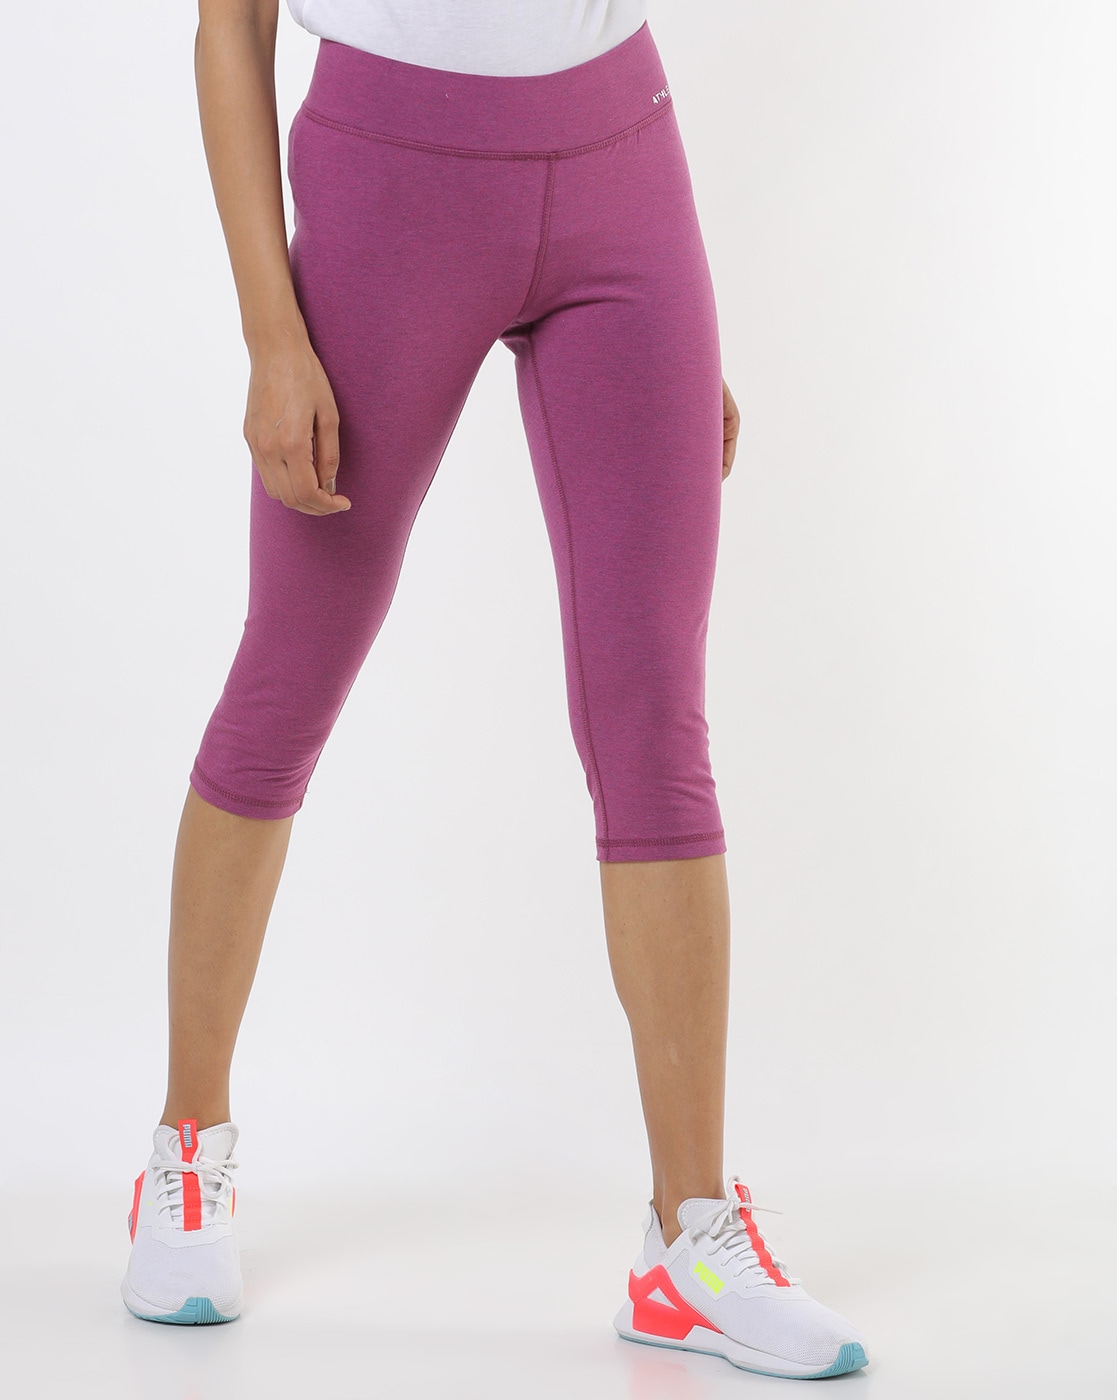 PROVENFIT - We can't get enough of these leggings 💜 Medium/high rise, mid  calf length and a thick waistband to make you feel comfortable and secure!  P.S. THEY'RE ON SALE! Get yours